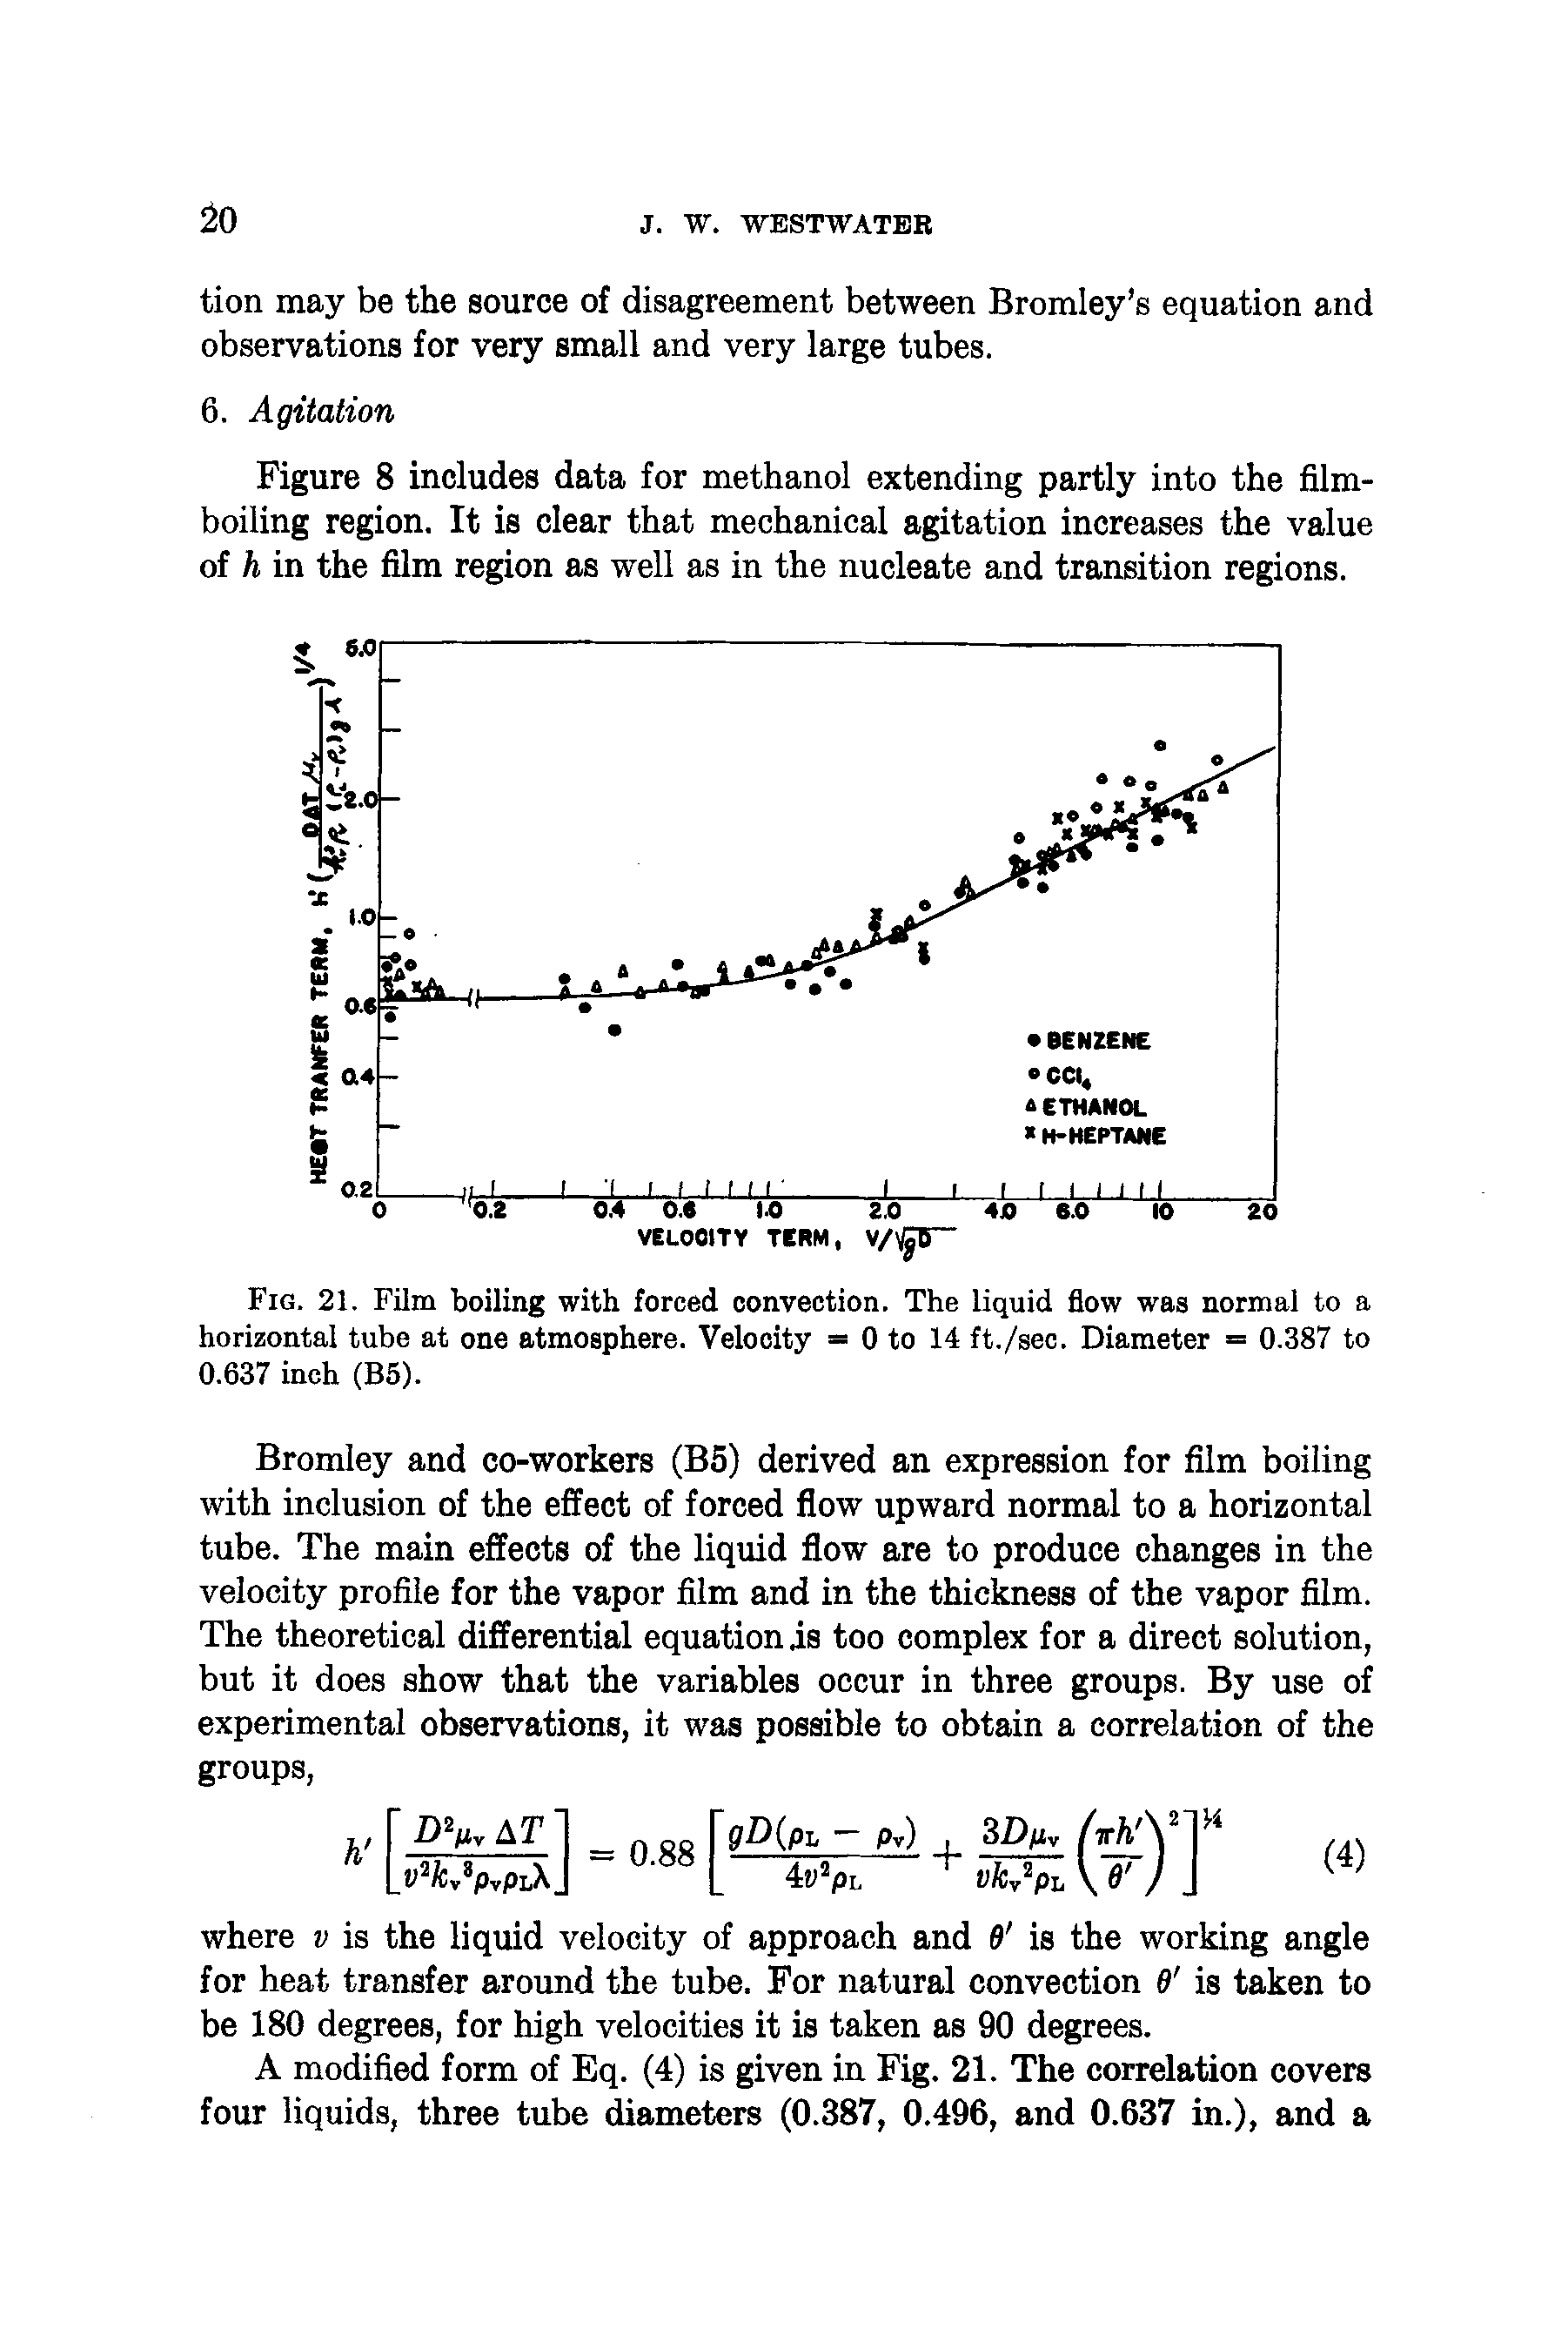 Fig. 21. Film boiling with forced convection. The liquid flow was normal to a horizontal tube at one atmosphere. Velocity = 0 to 14 ft./sec. Diameter = 0.387 to 0.637 inch (B5).